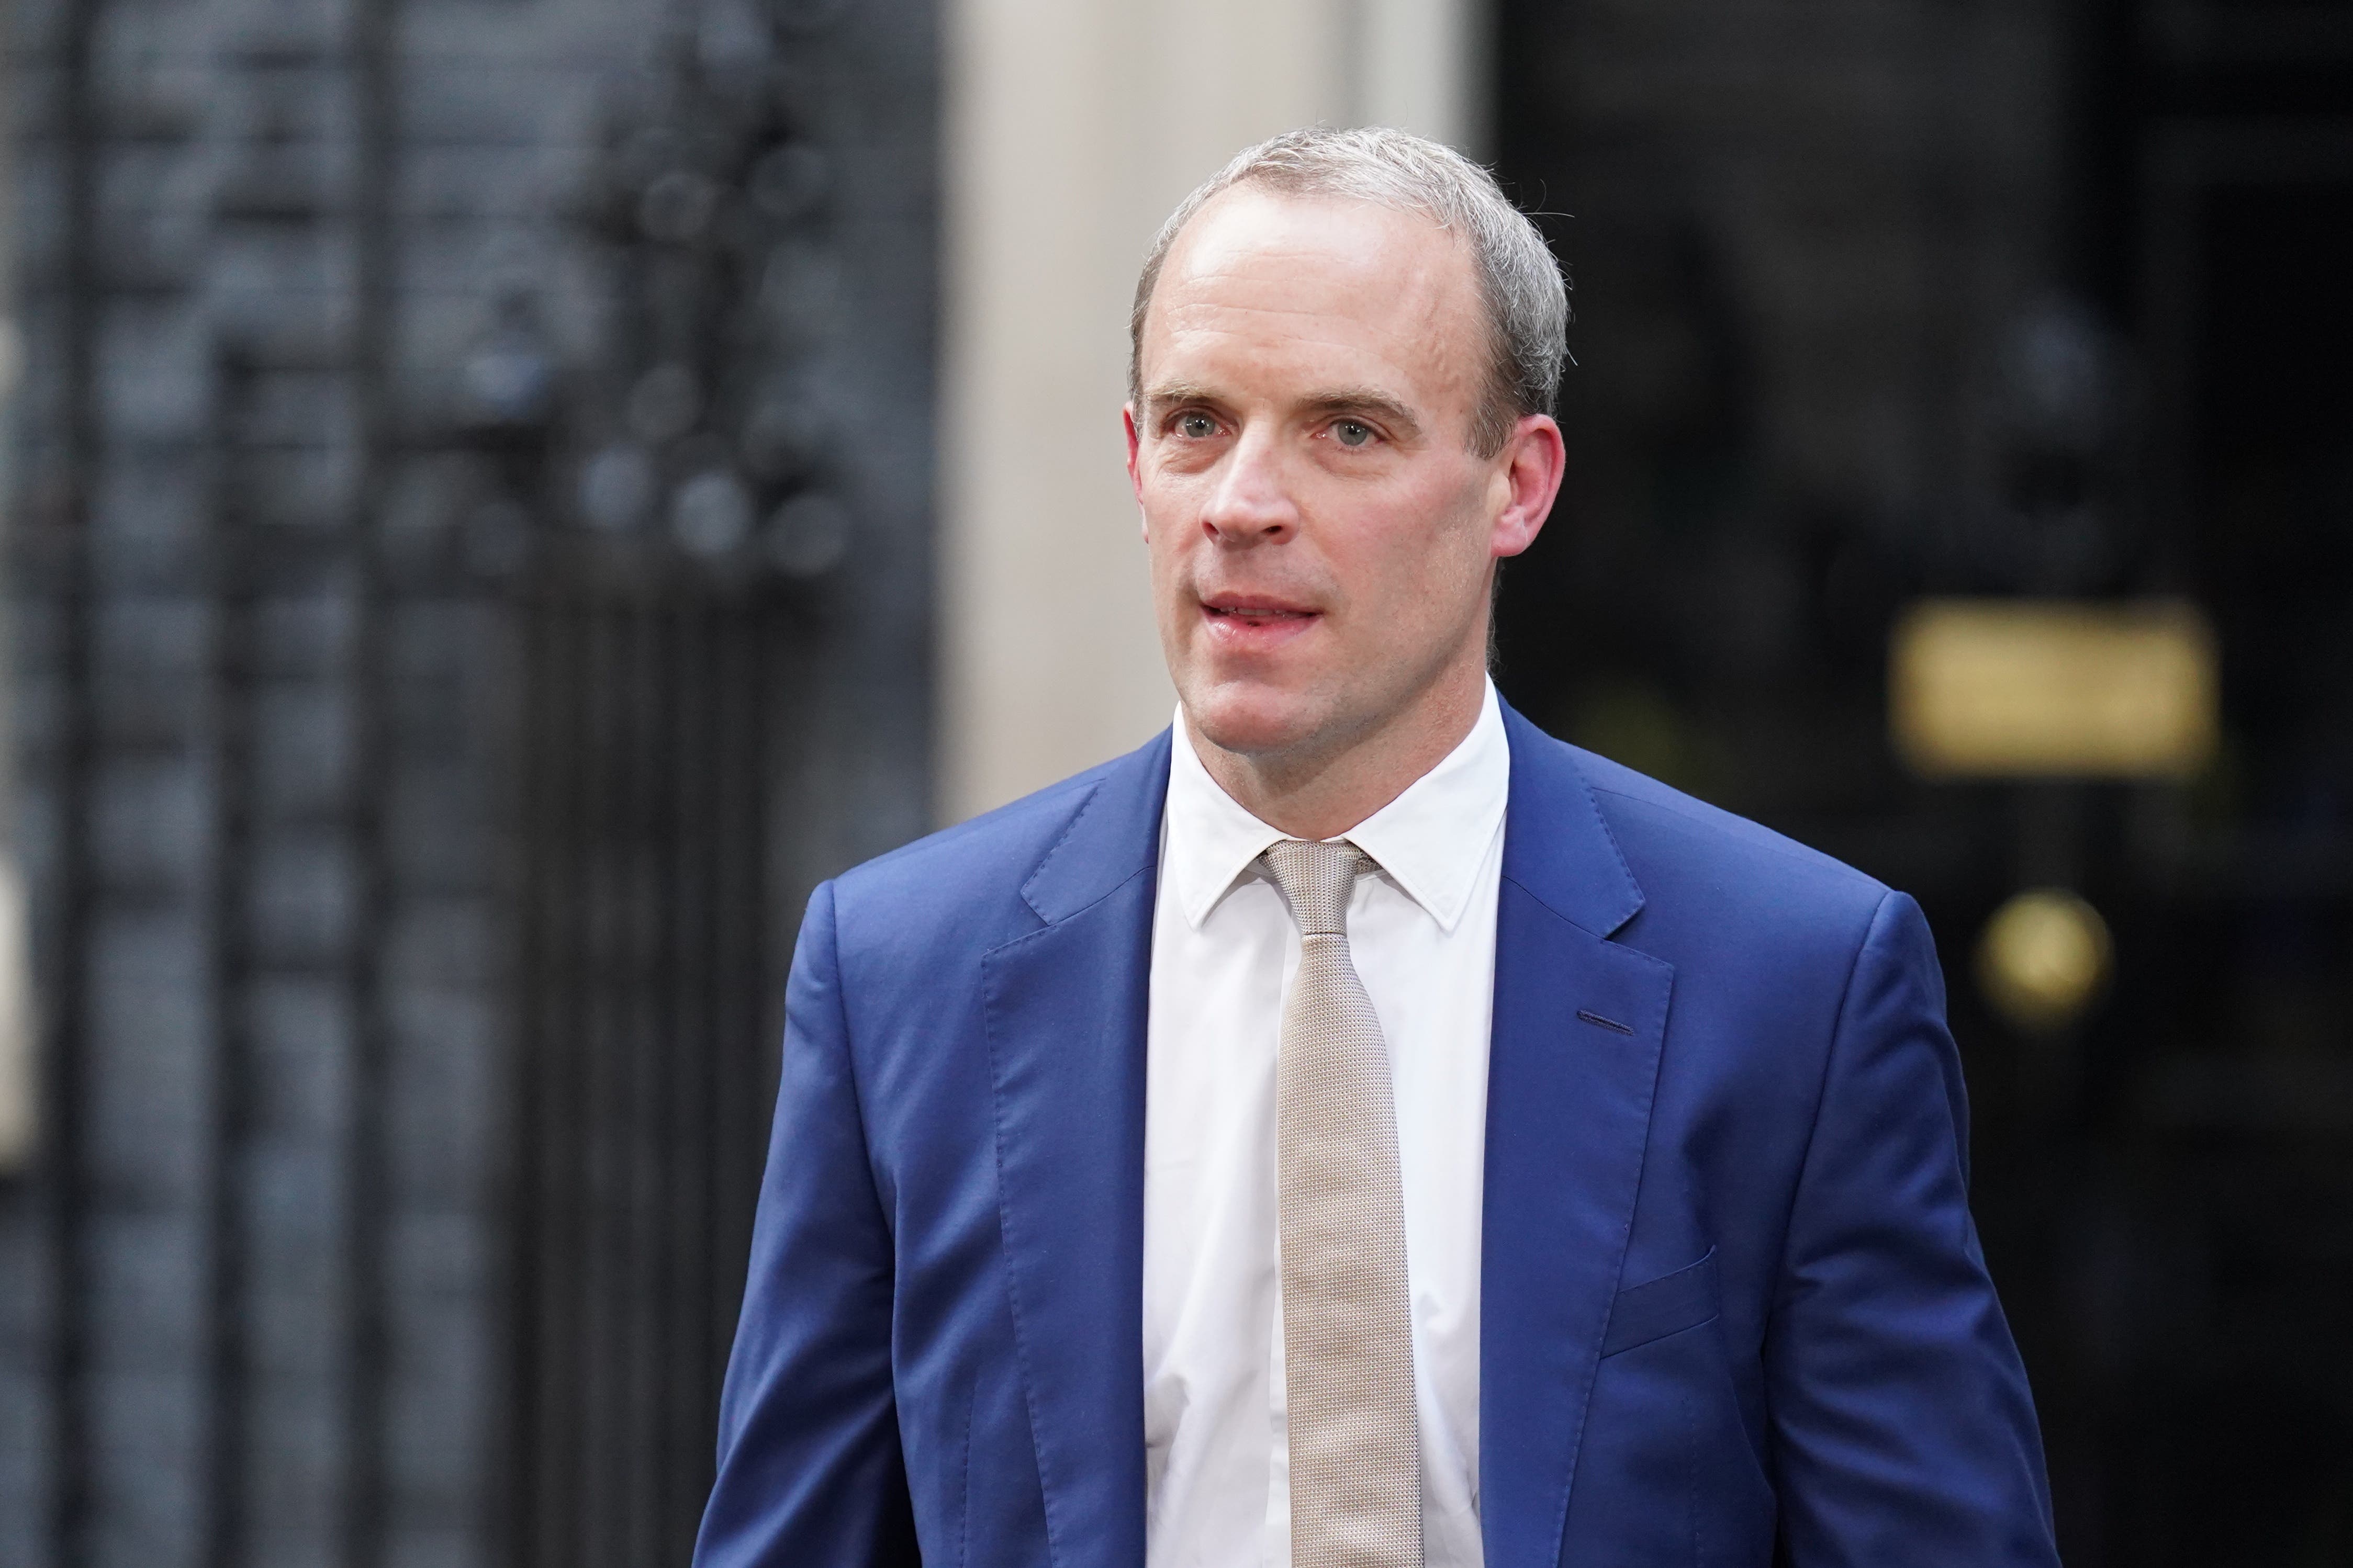 Legal action has been launched against Dominic Raab’s decision not to hold a public inquiry